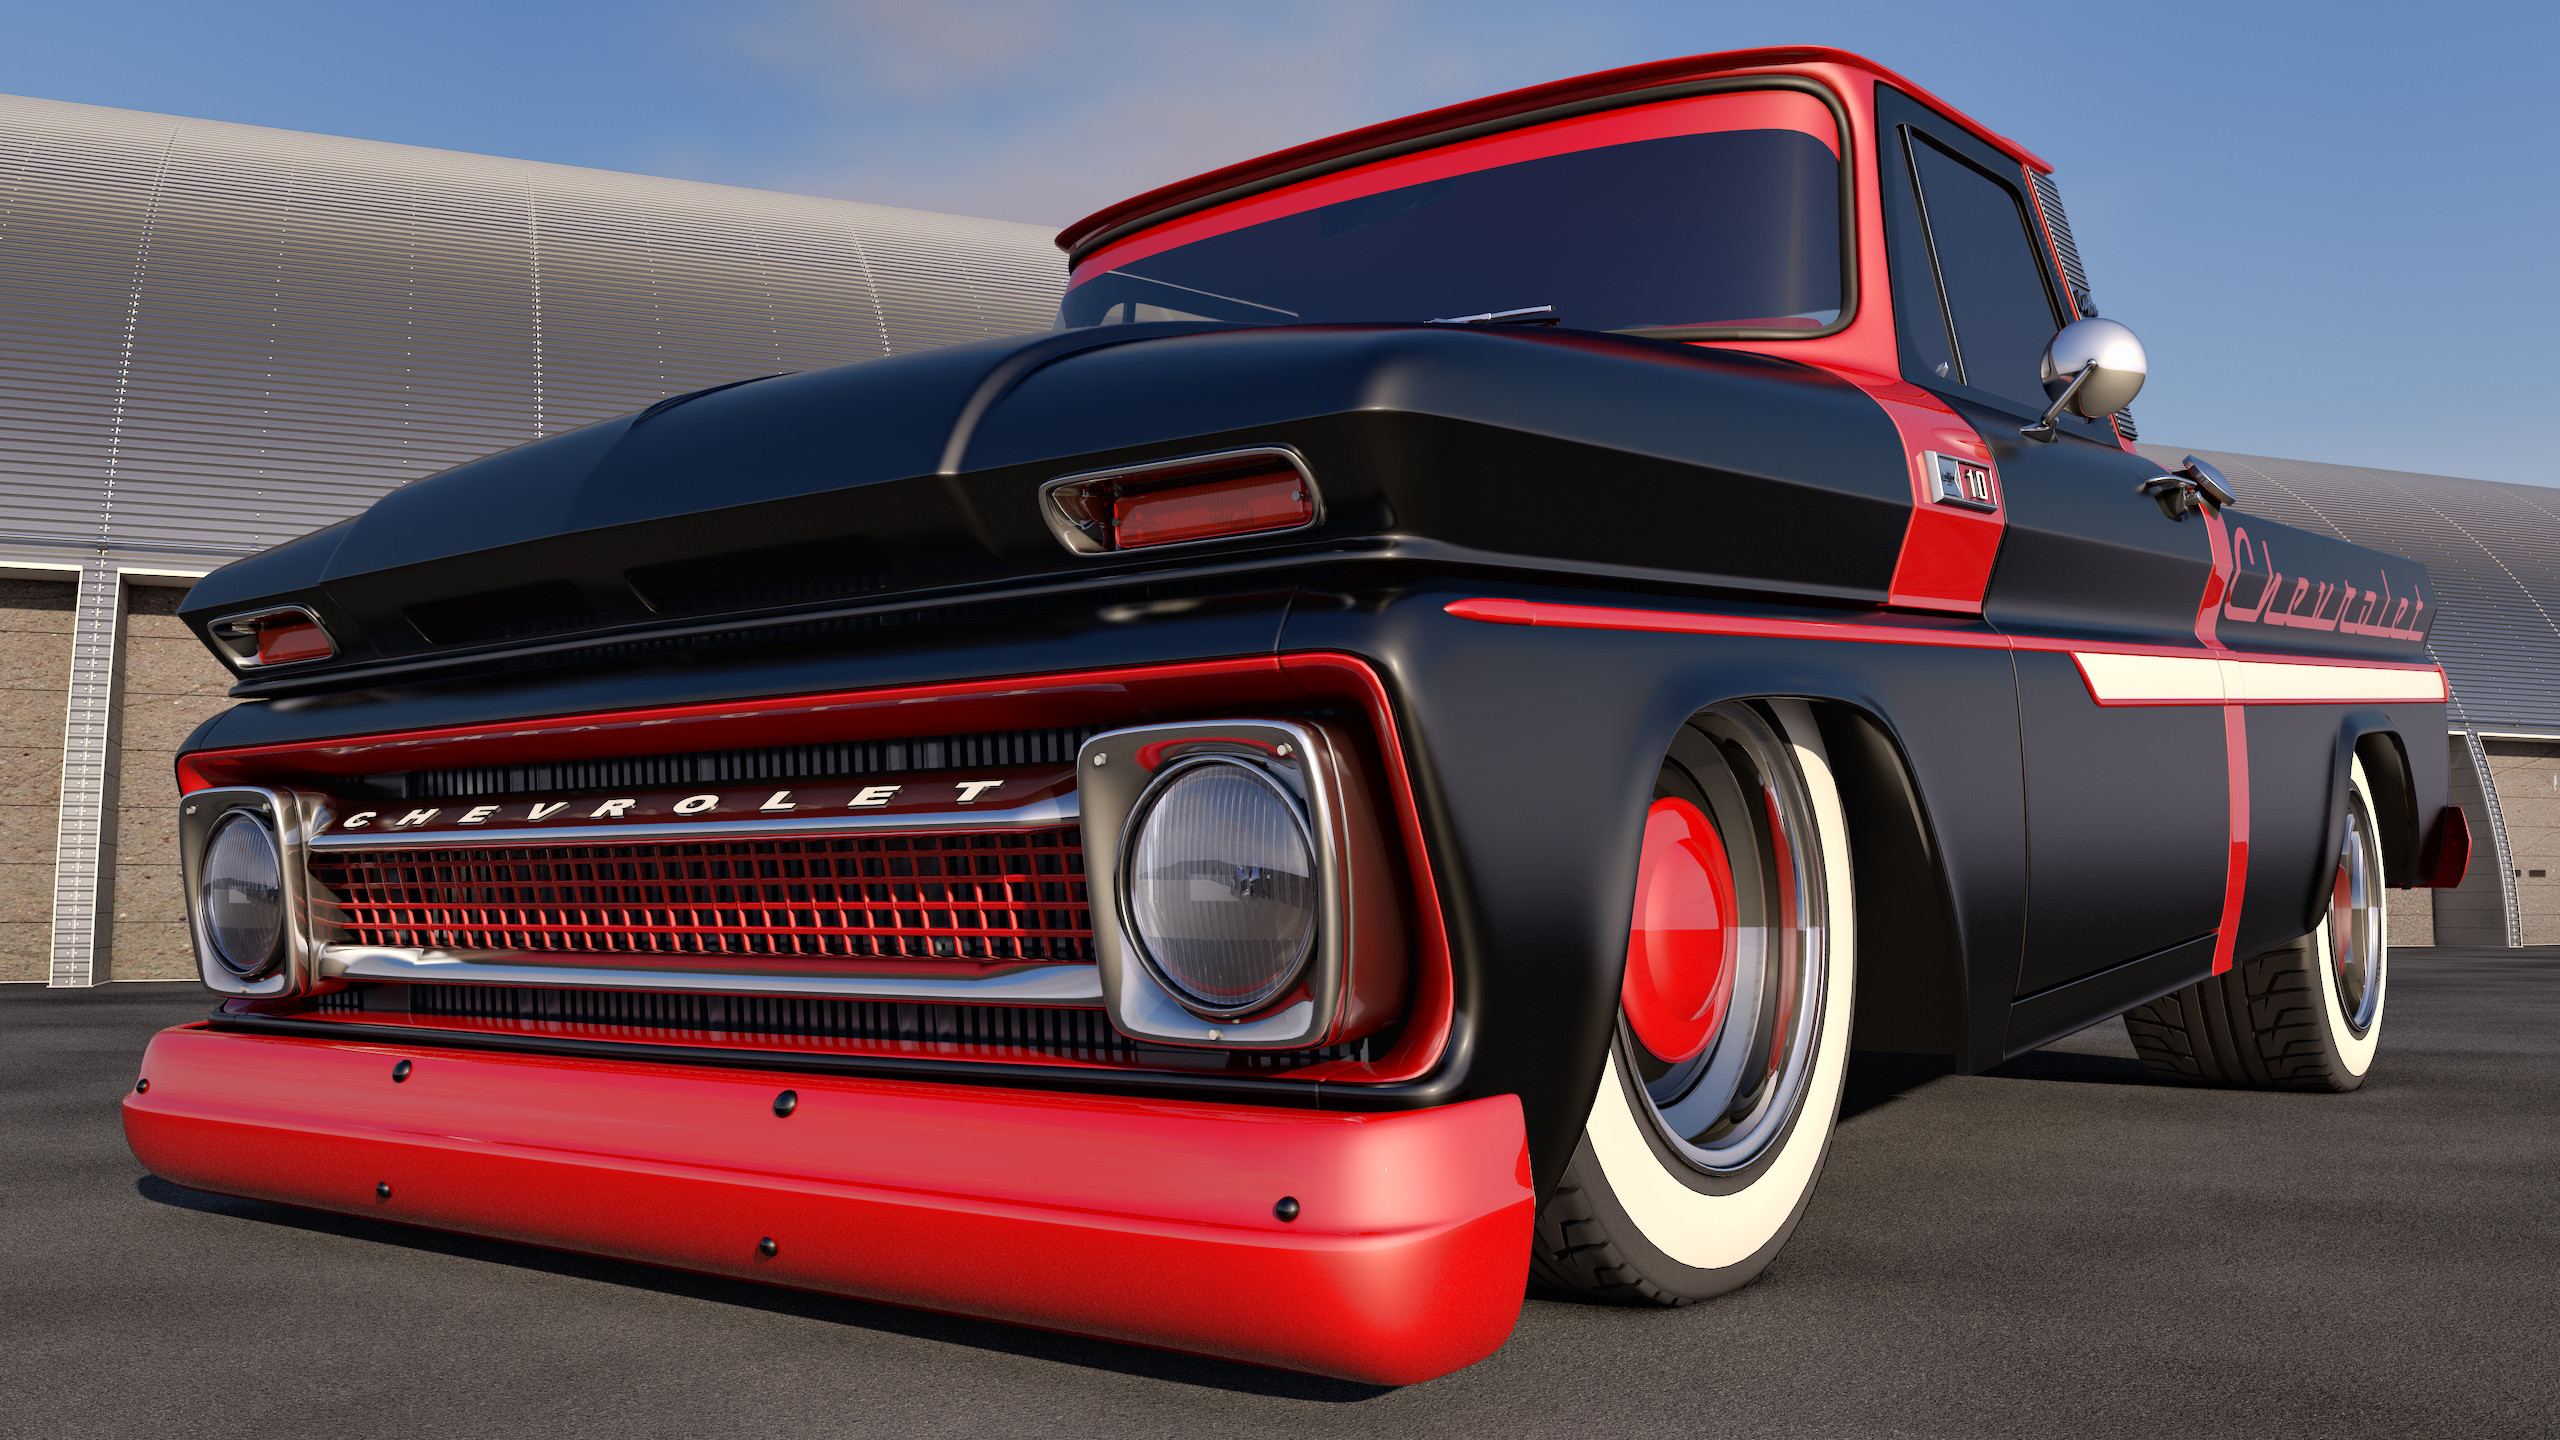 Old Chevy Truck Wallpaper Image